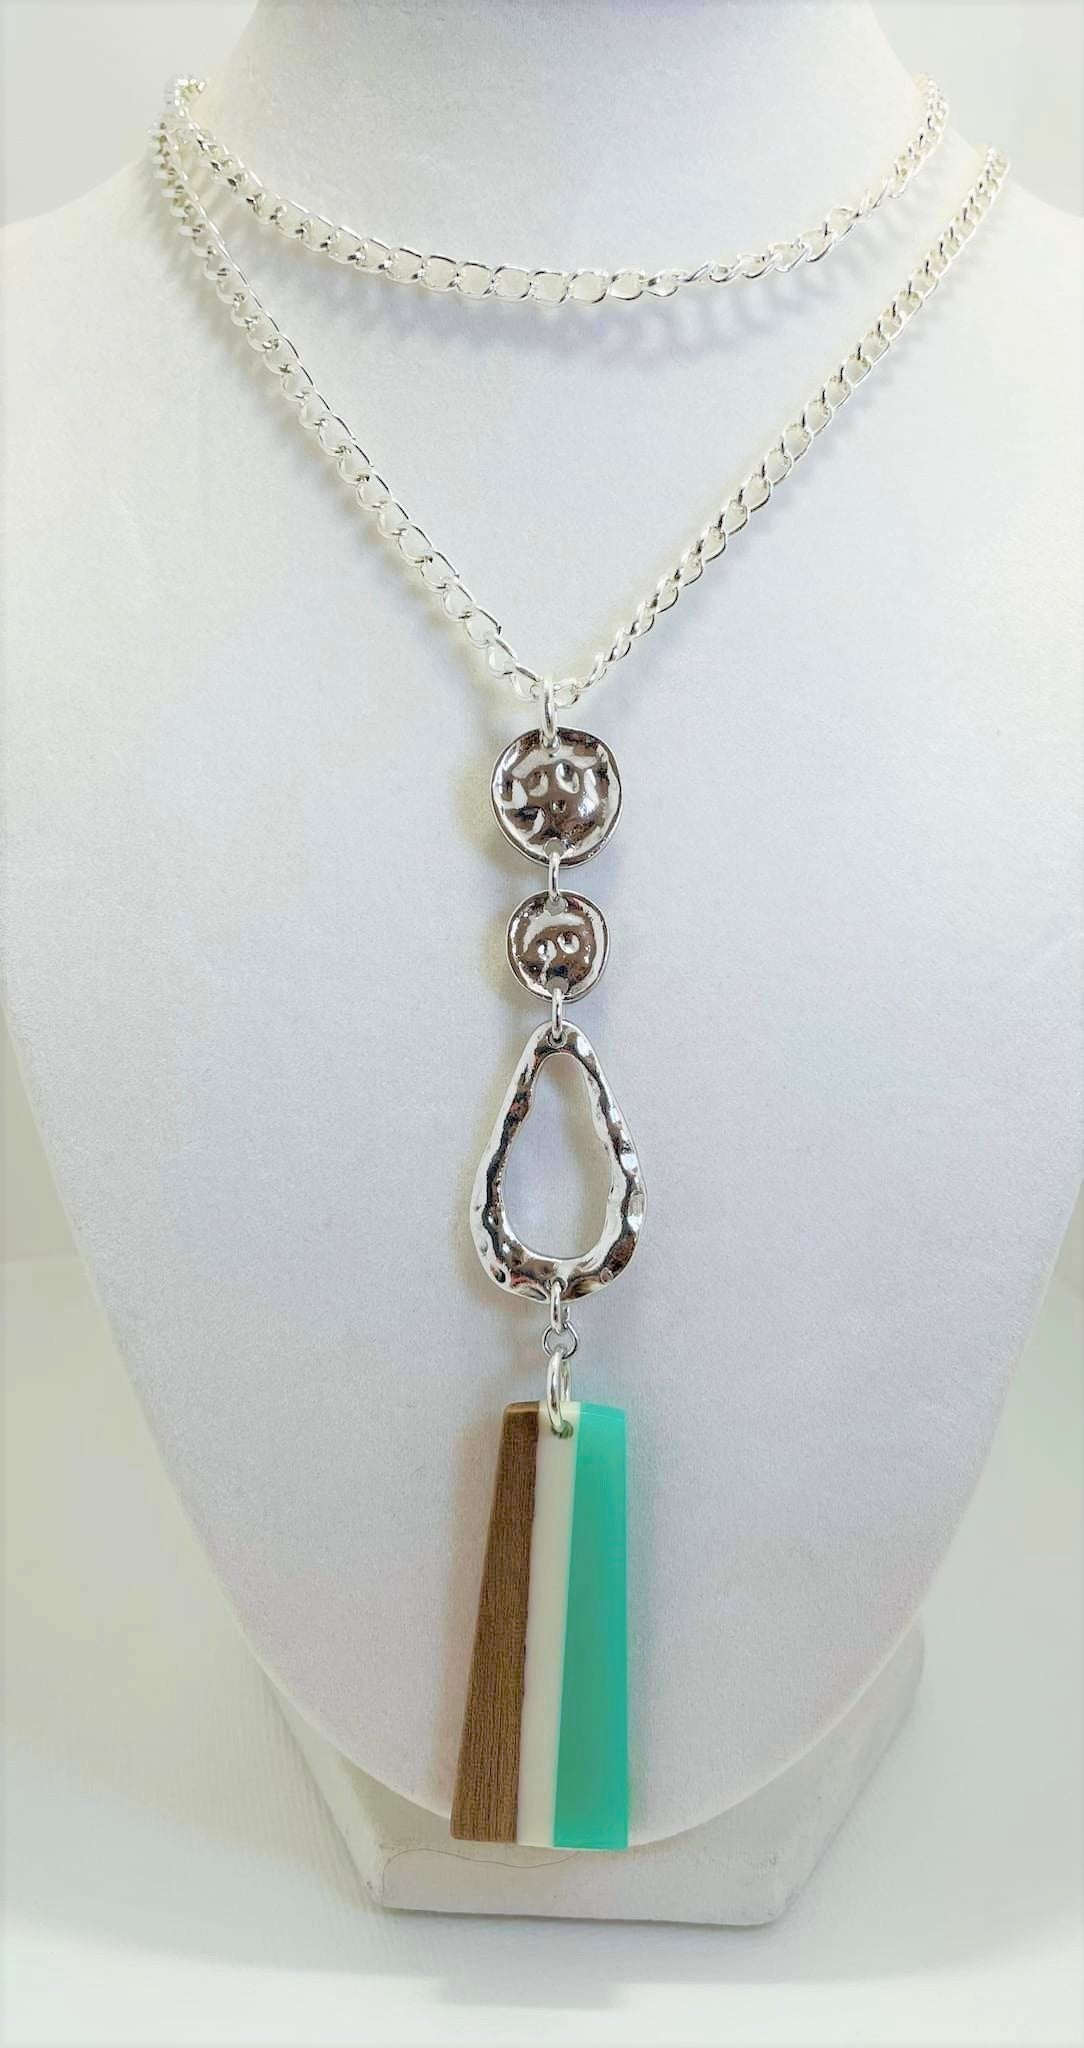 Silver Necklace handcrafted by Linda